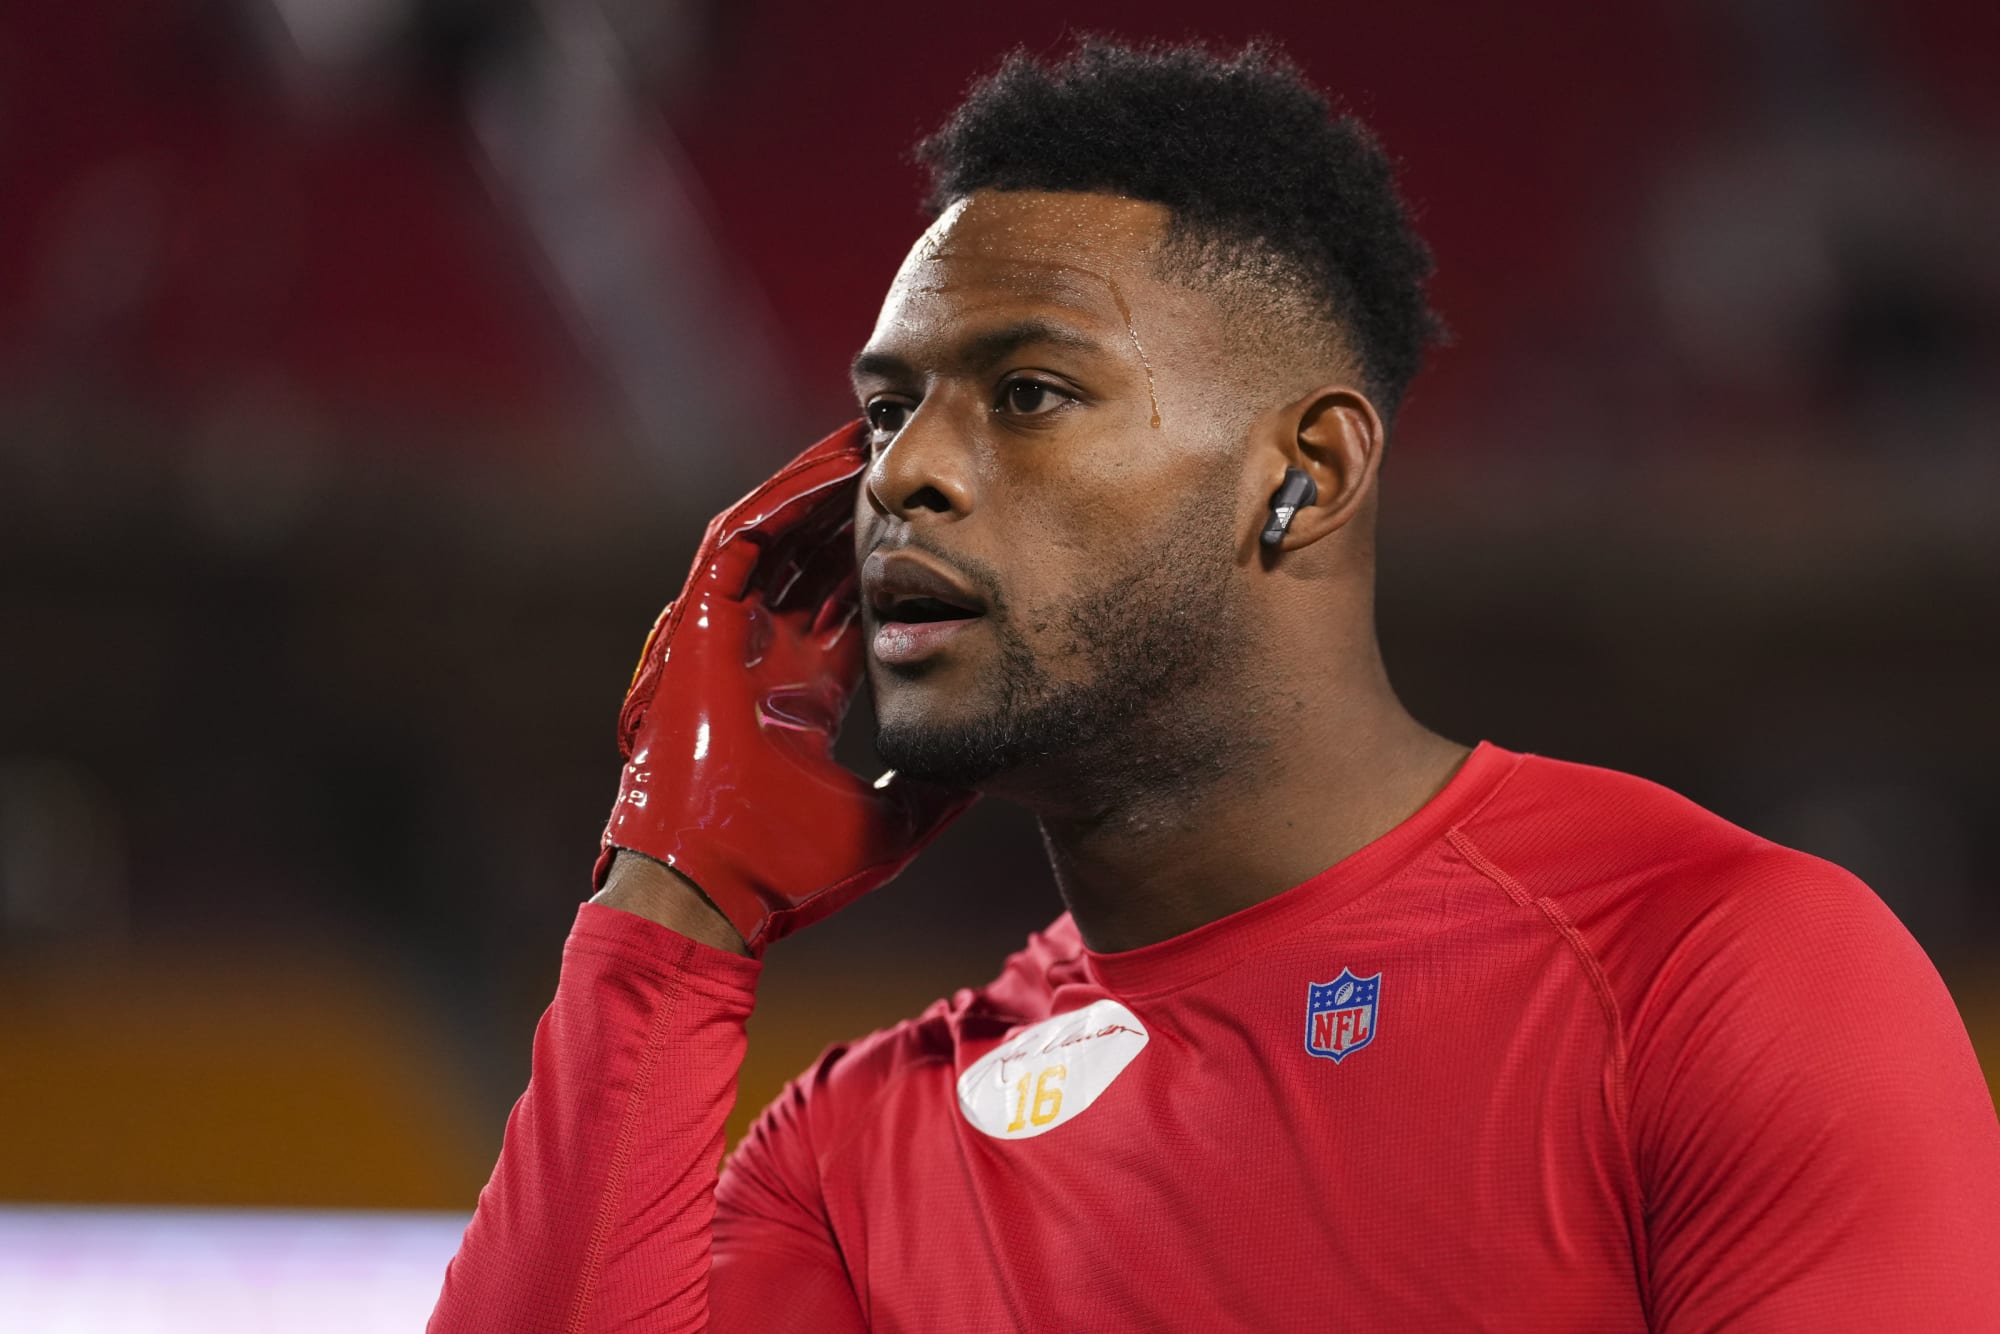 NFL WR JuJu Smith-Schuster claims that Warzone helped the Chiefs